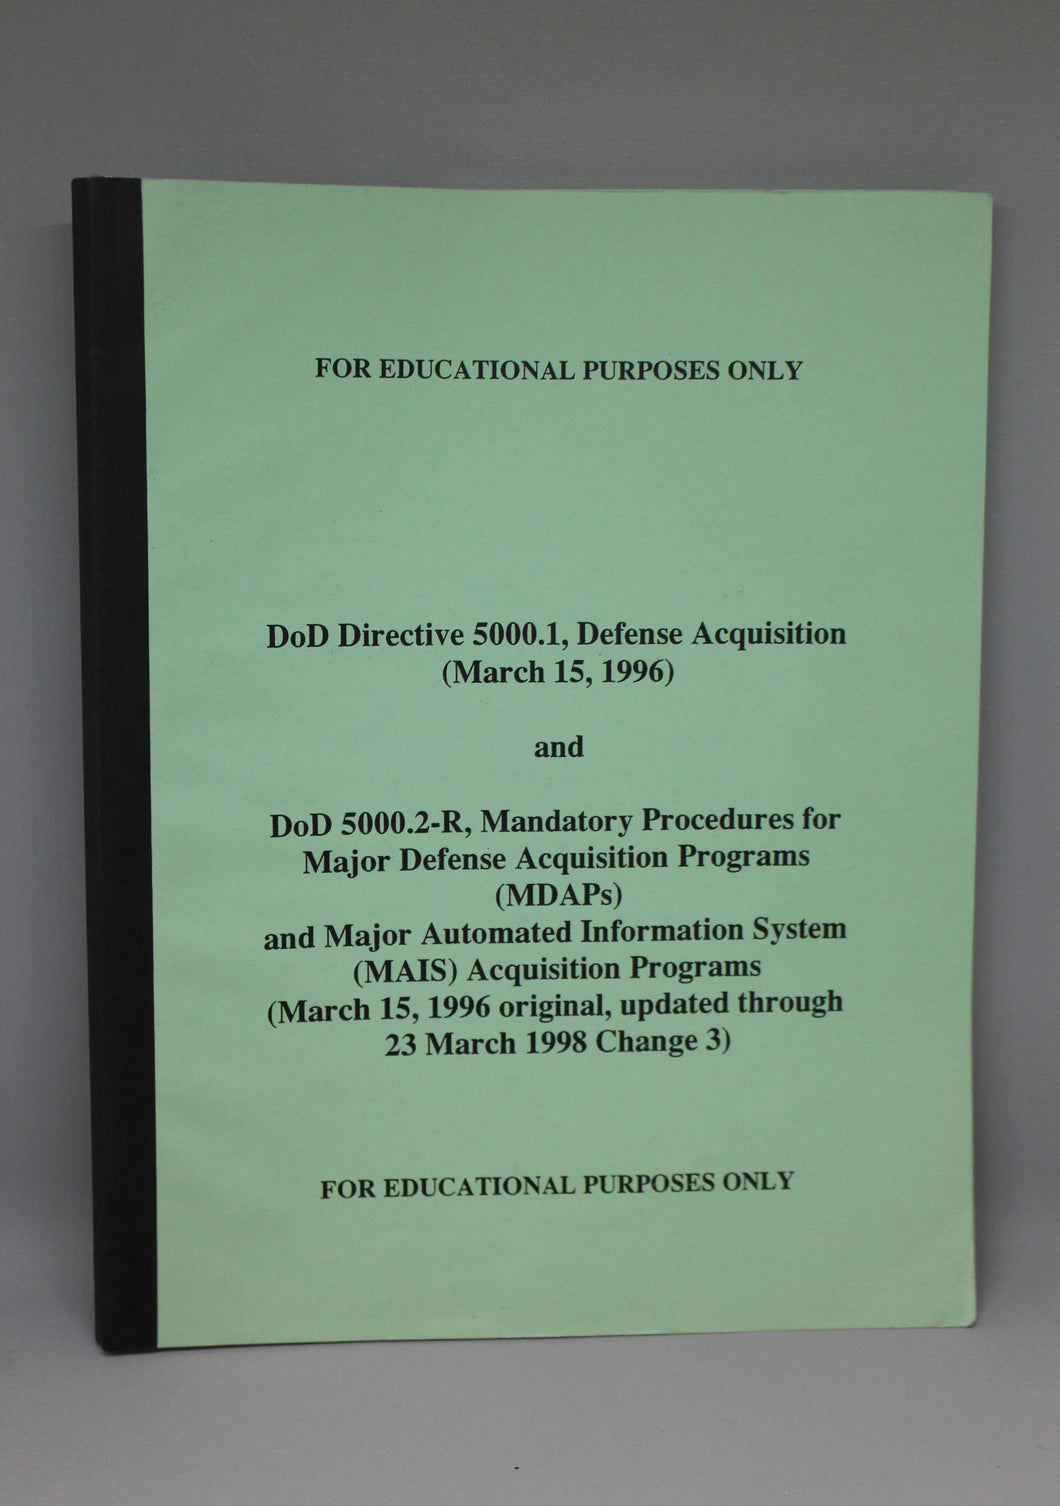 DoD Directive 5000.1 Defense Acquistion, March 15, 1996